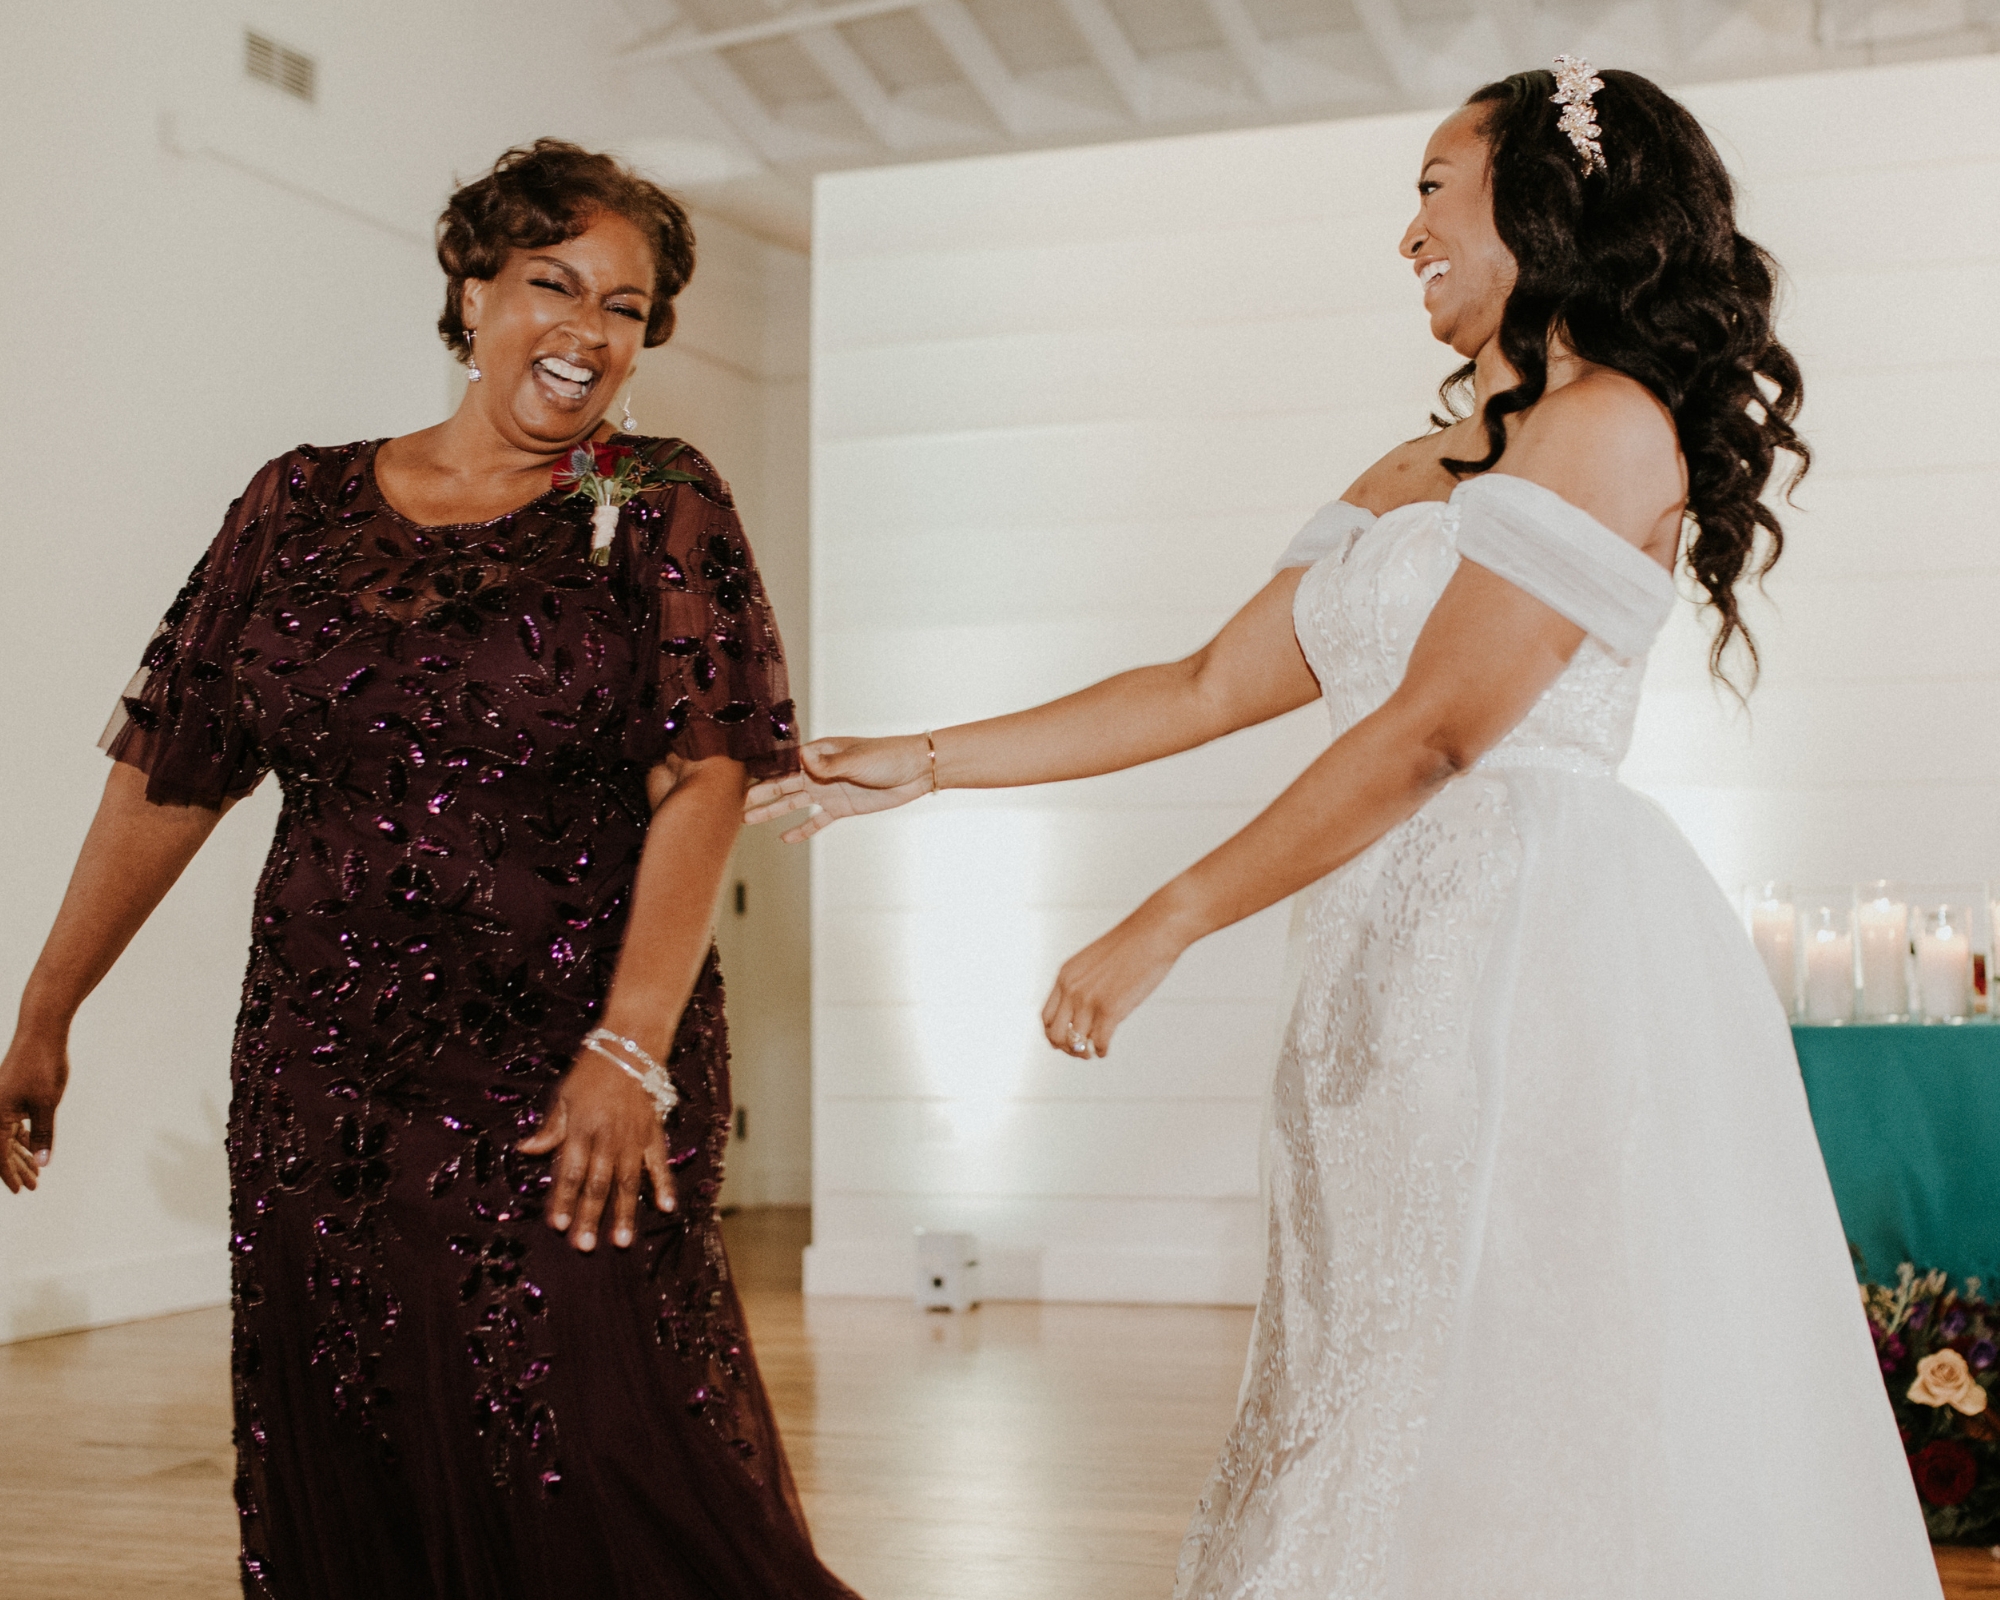 Best R&B Mother Daughter Dance Songs for Your Wedding